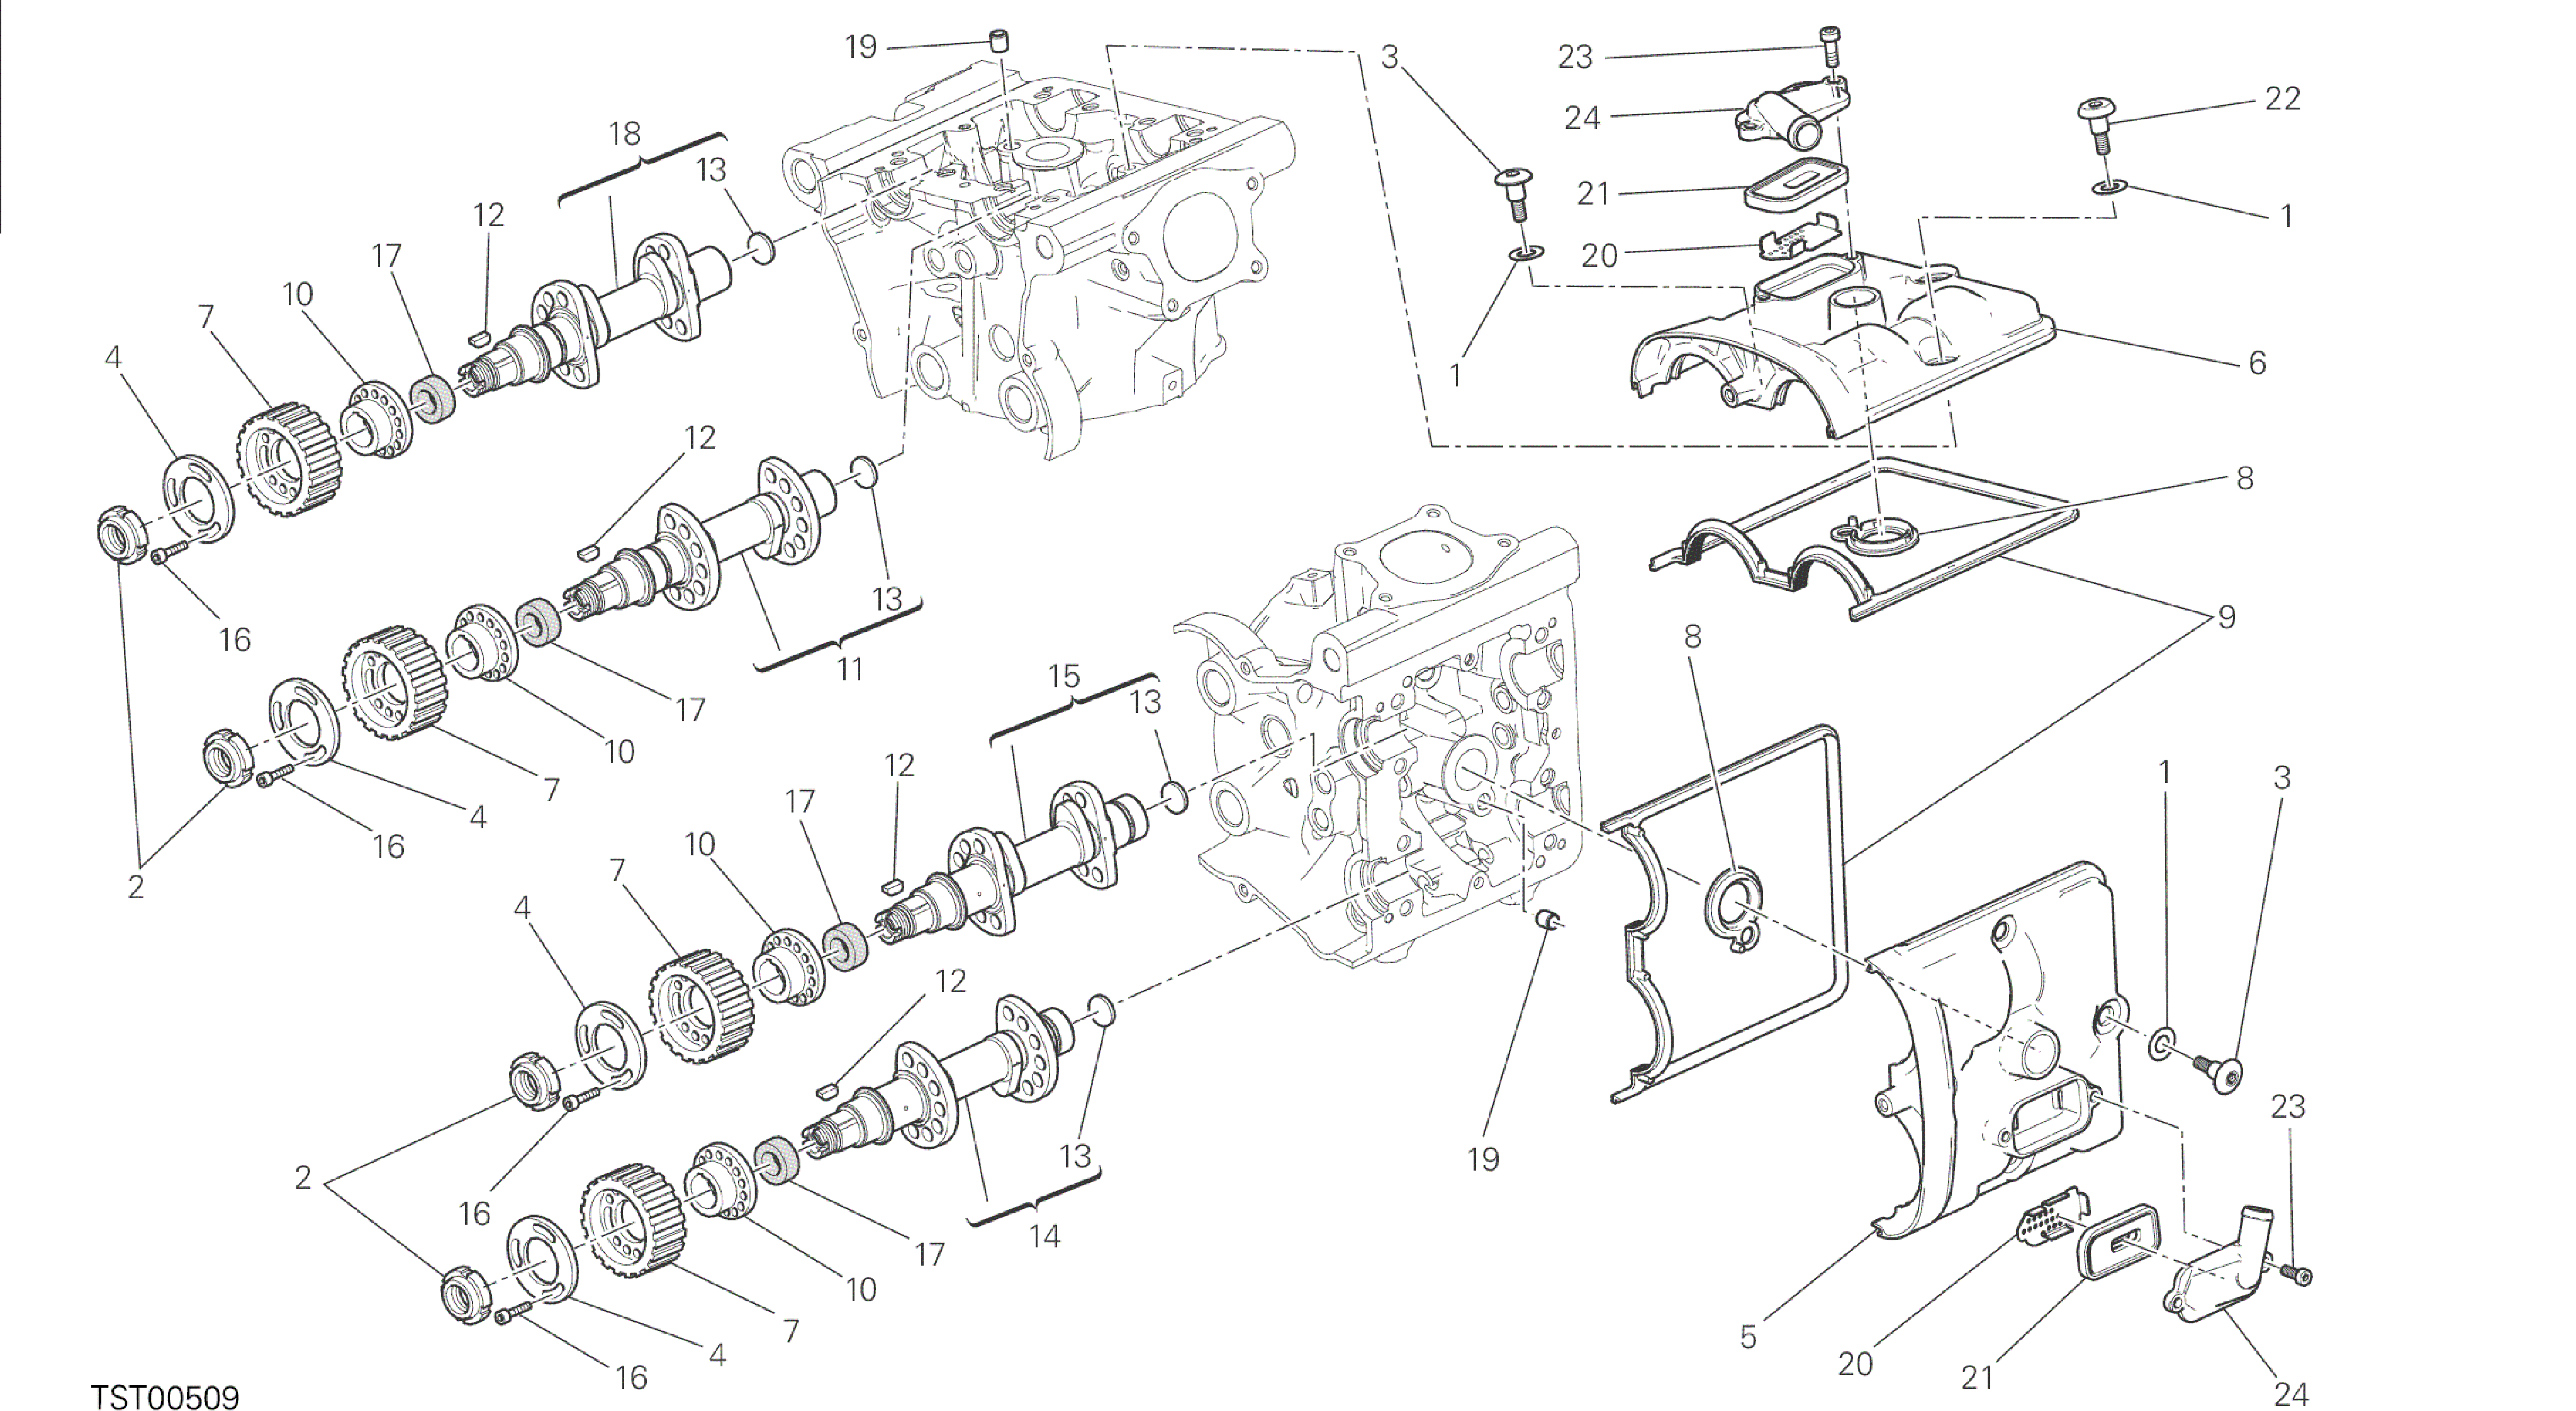 DRAWING 013 - CAMSHAFT [MOD:M 1200S]GROUP ENGINE